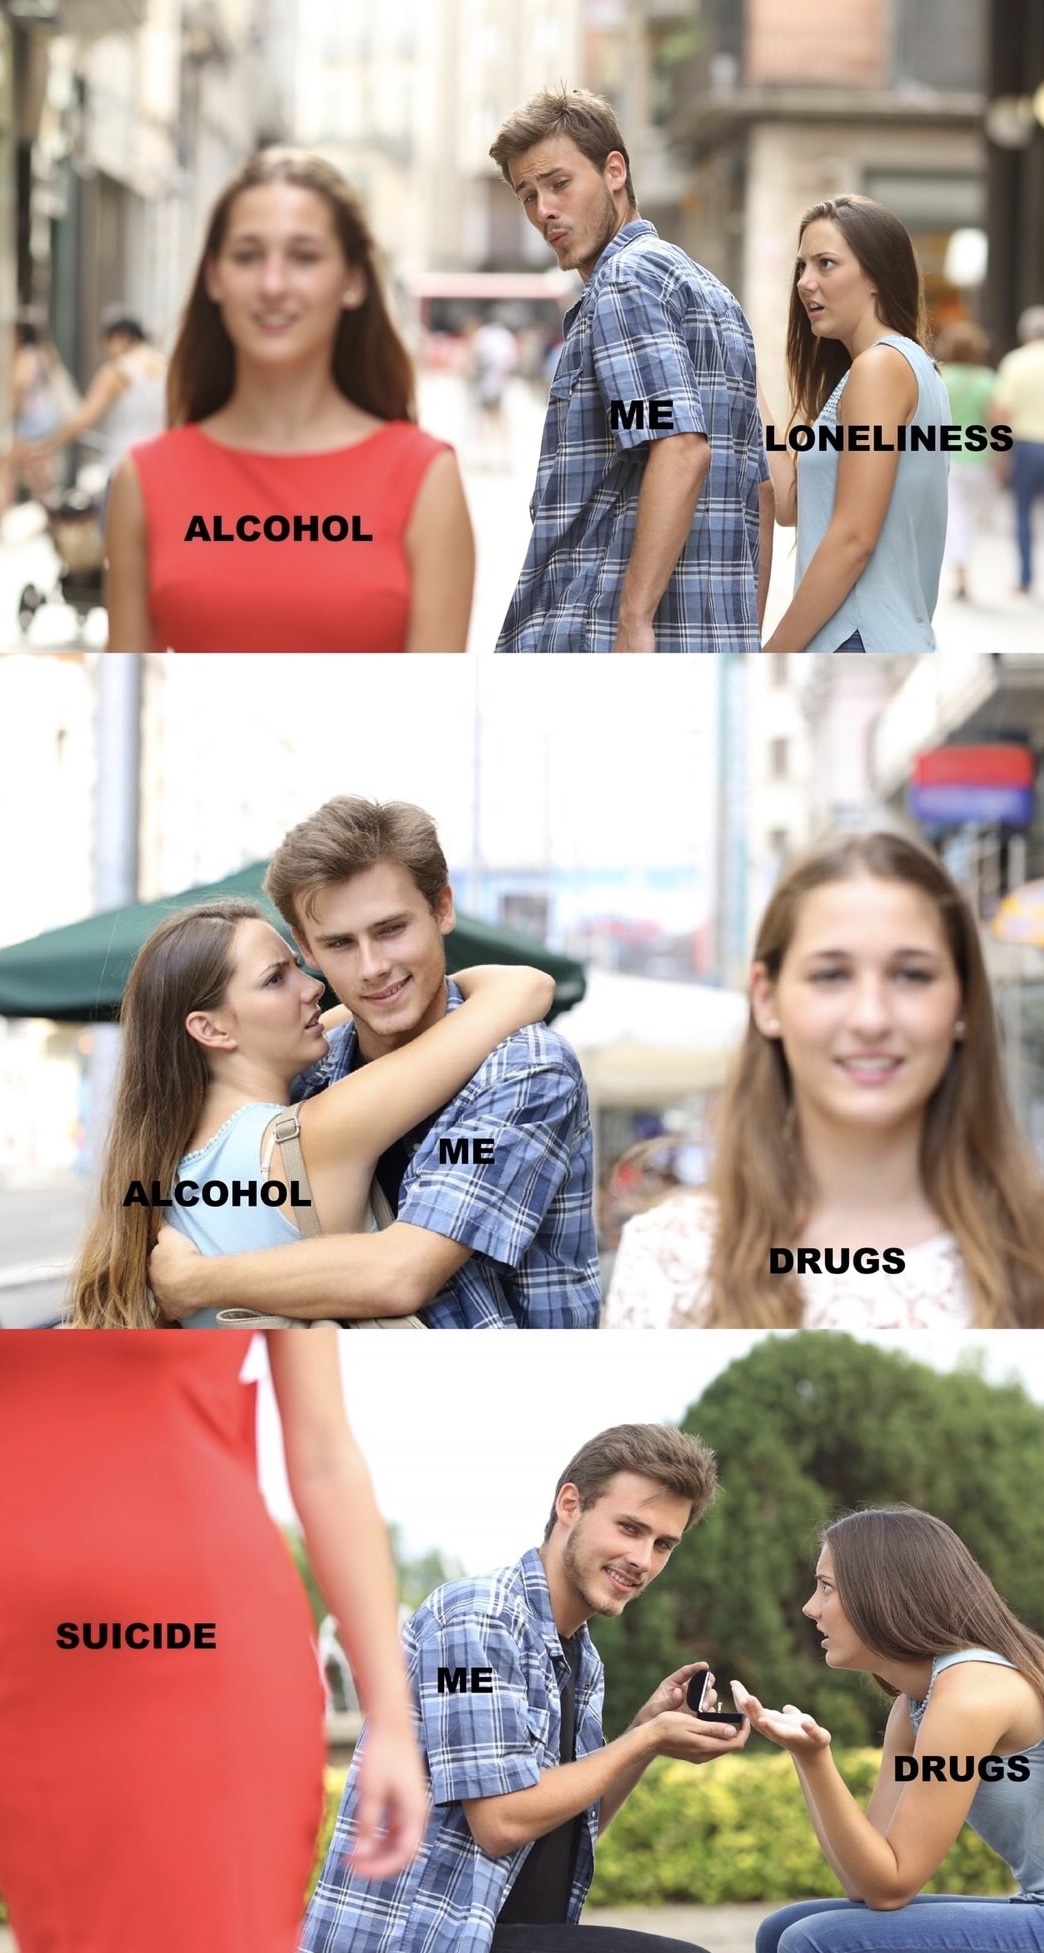 guy checking out girl meme - Meloneliness Alcohol Alcohol Drugs Suicide Drugs